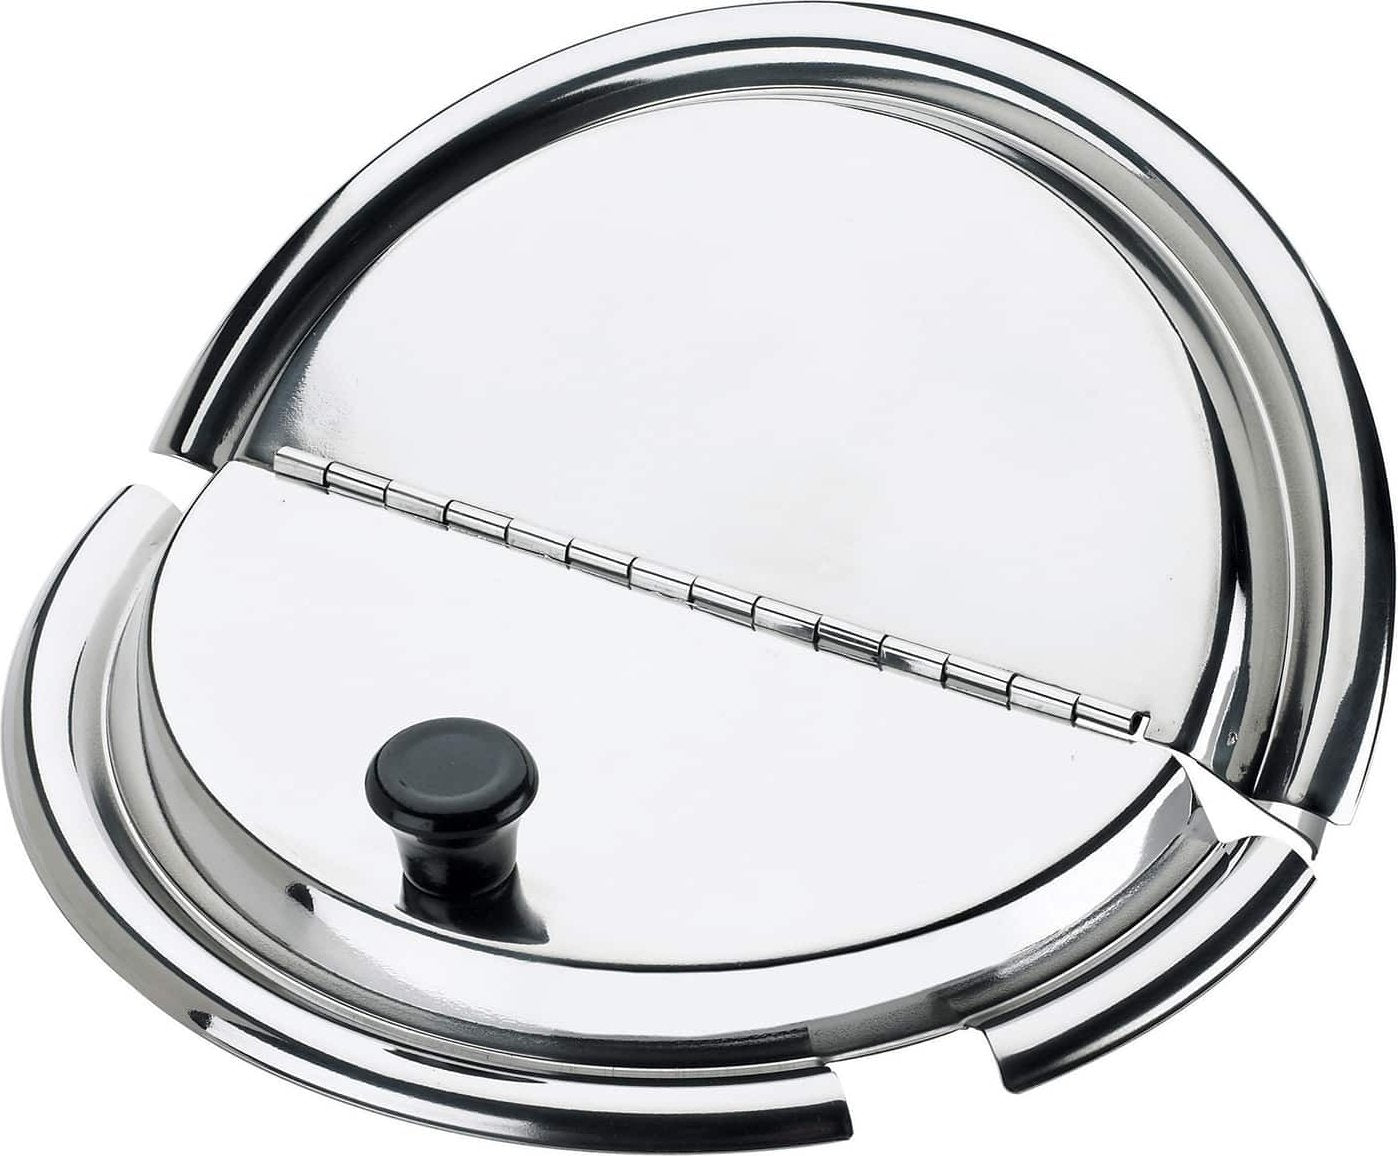 Browne - Stainless Steel Hinged Cover For 11 QT Steam Inset Pan #575591 - 575593